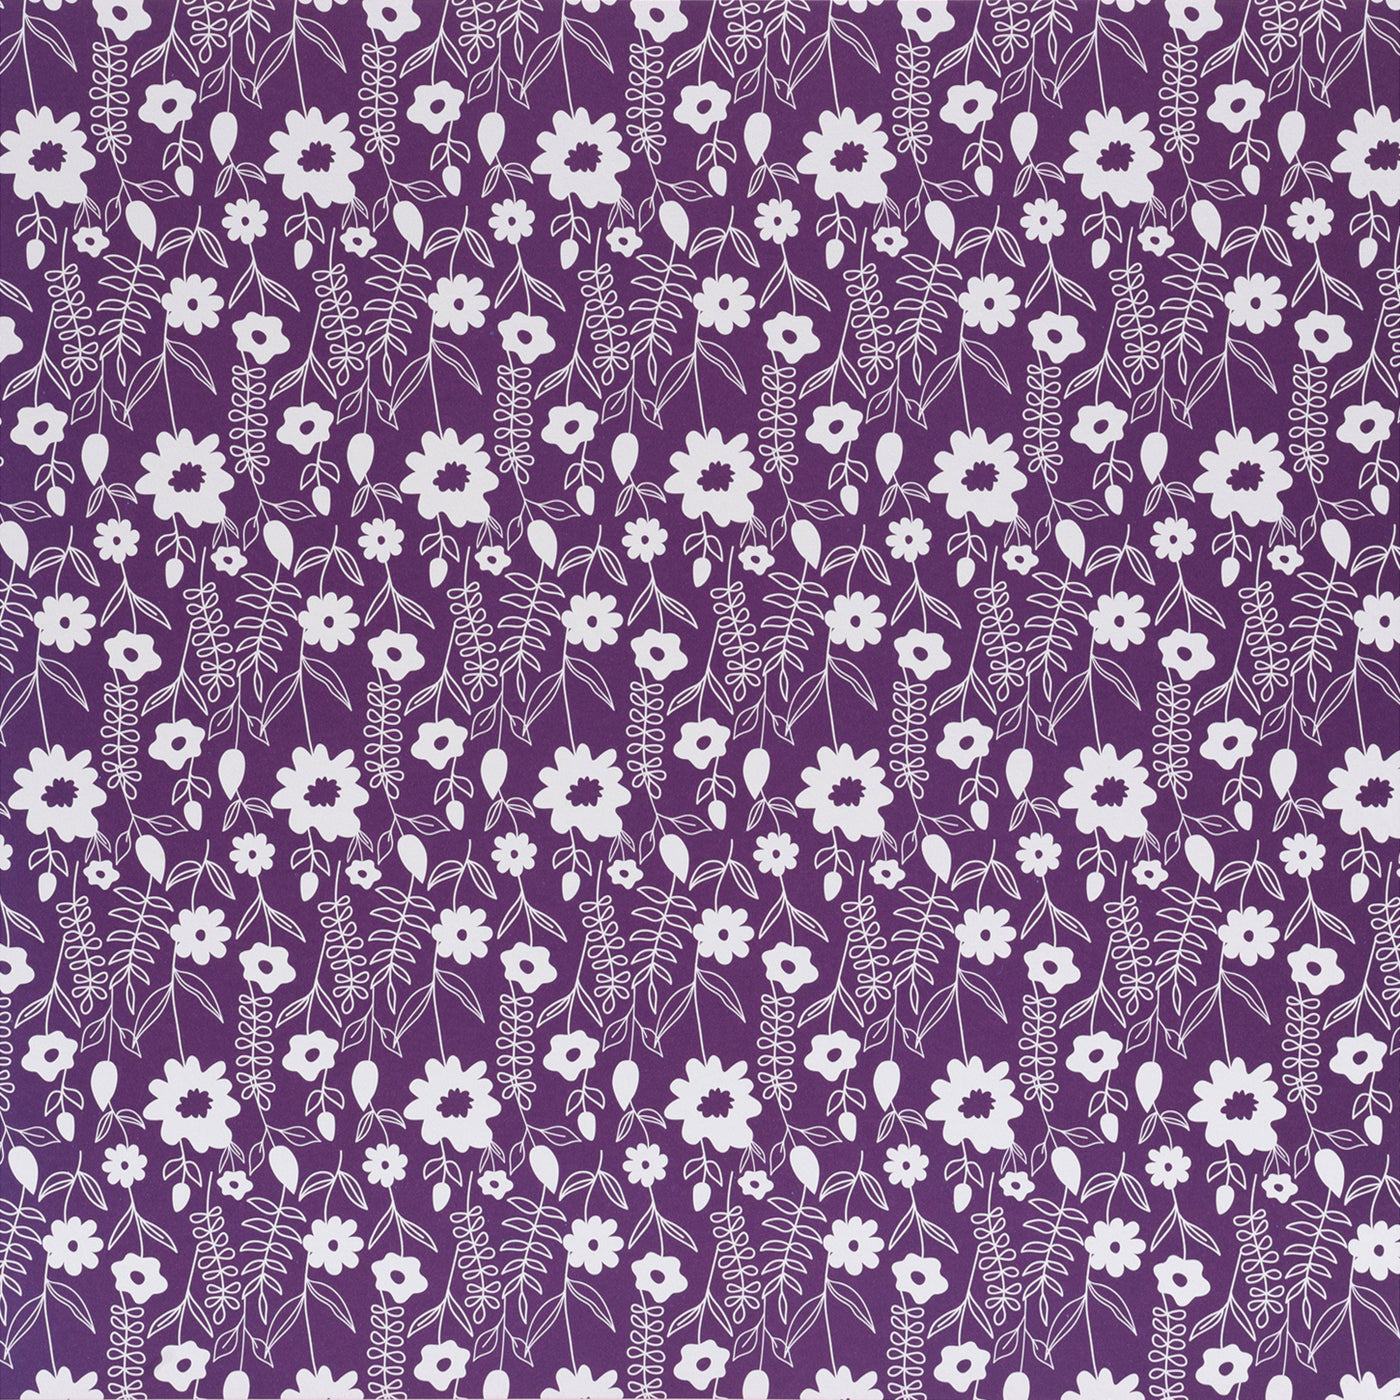 12x12 patterned paper with white floral print on purple background - DCWV